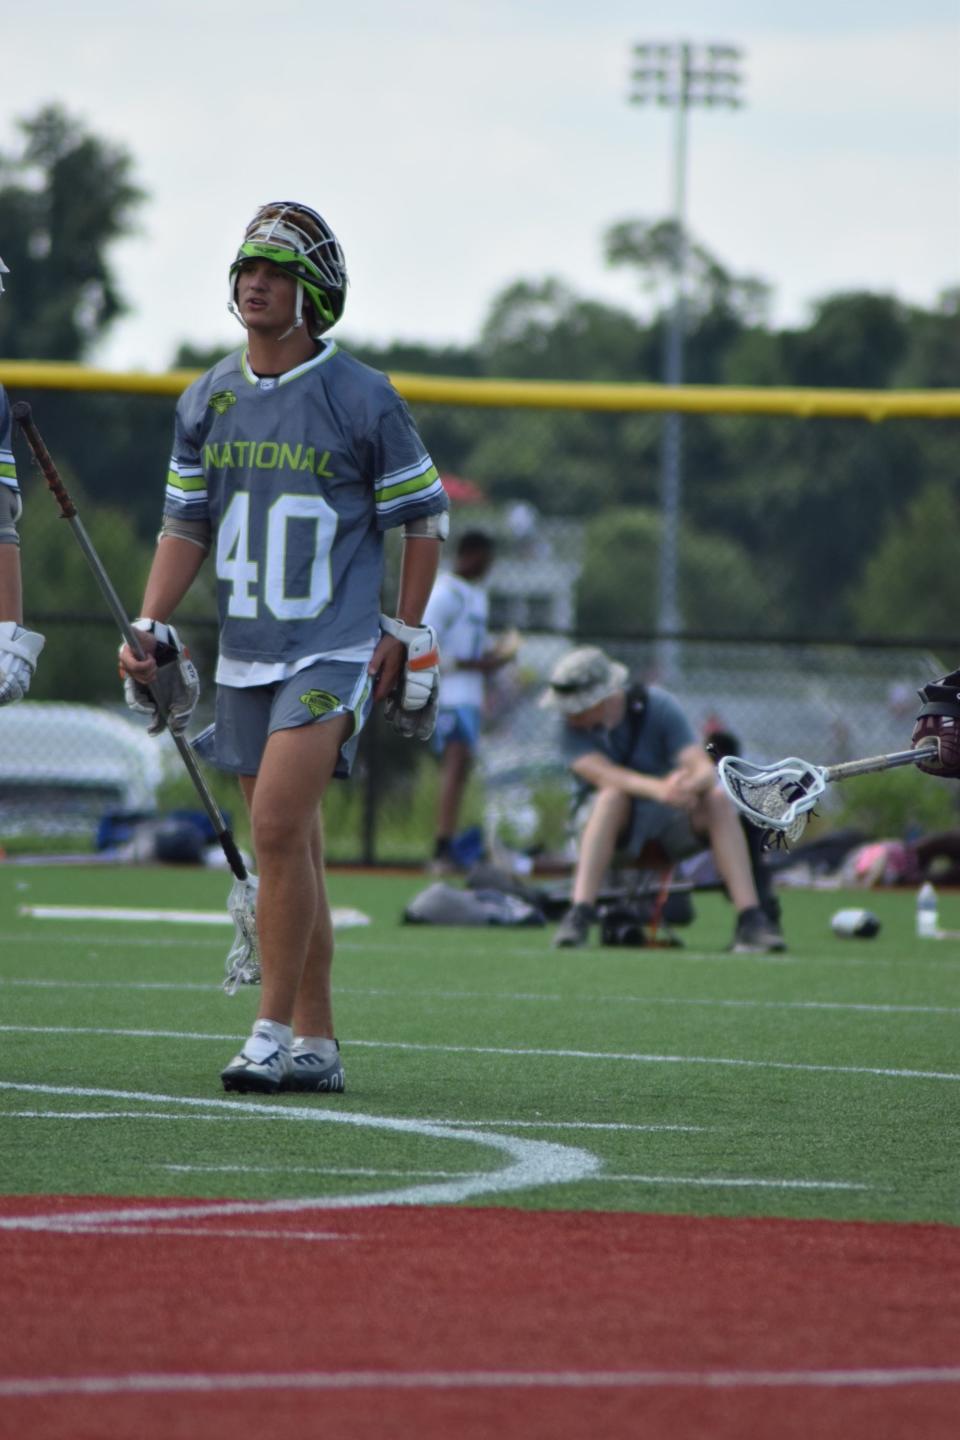 Lakeland's Ian Hobson, pictured here, competes in a lacrosse travel summer league at Blandair Park in Maryland July 11, 2023.